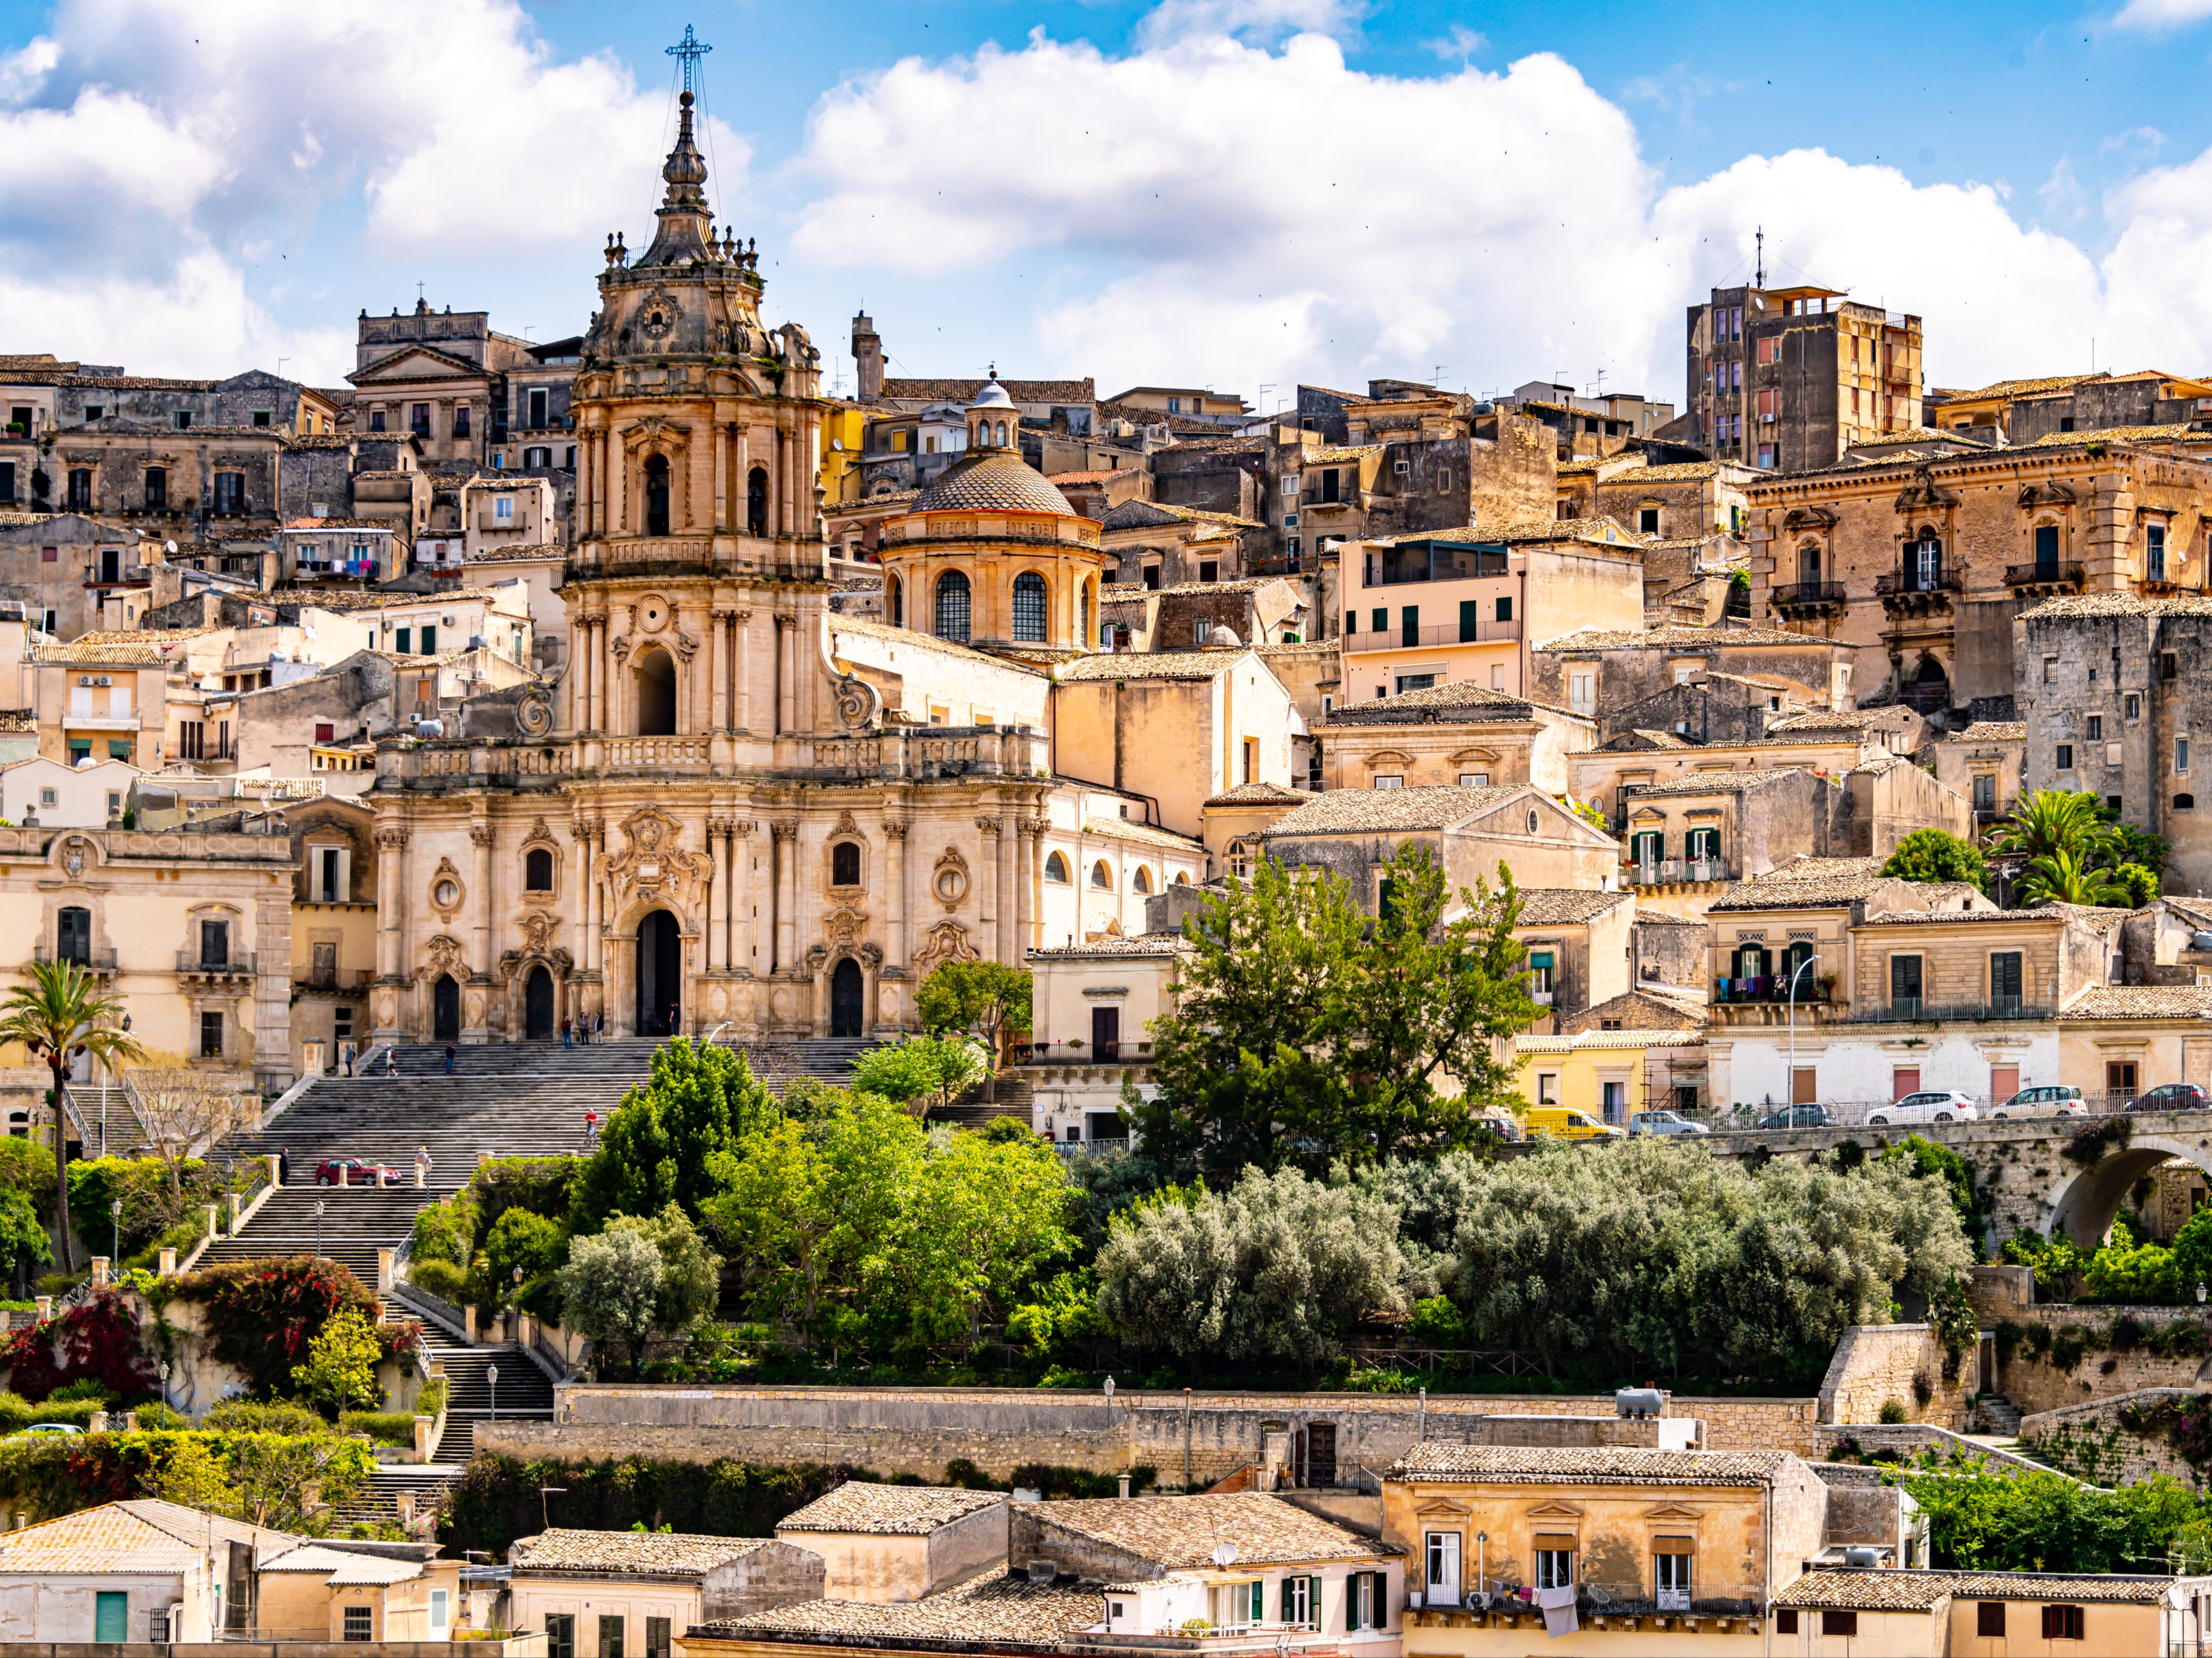 Known for its chocolate, Modica was a town originally all carved into rock